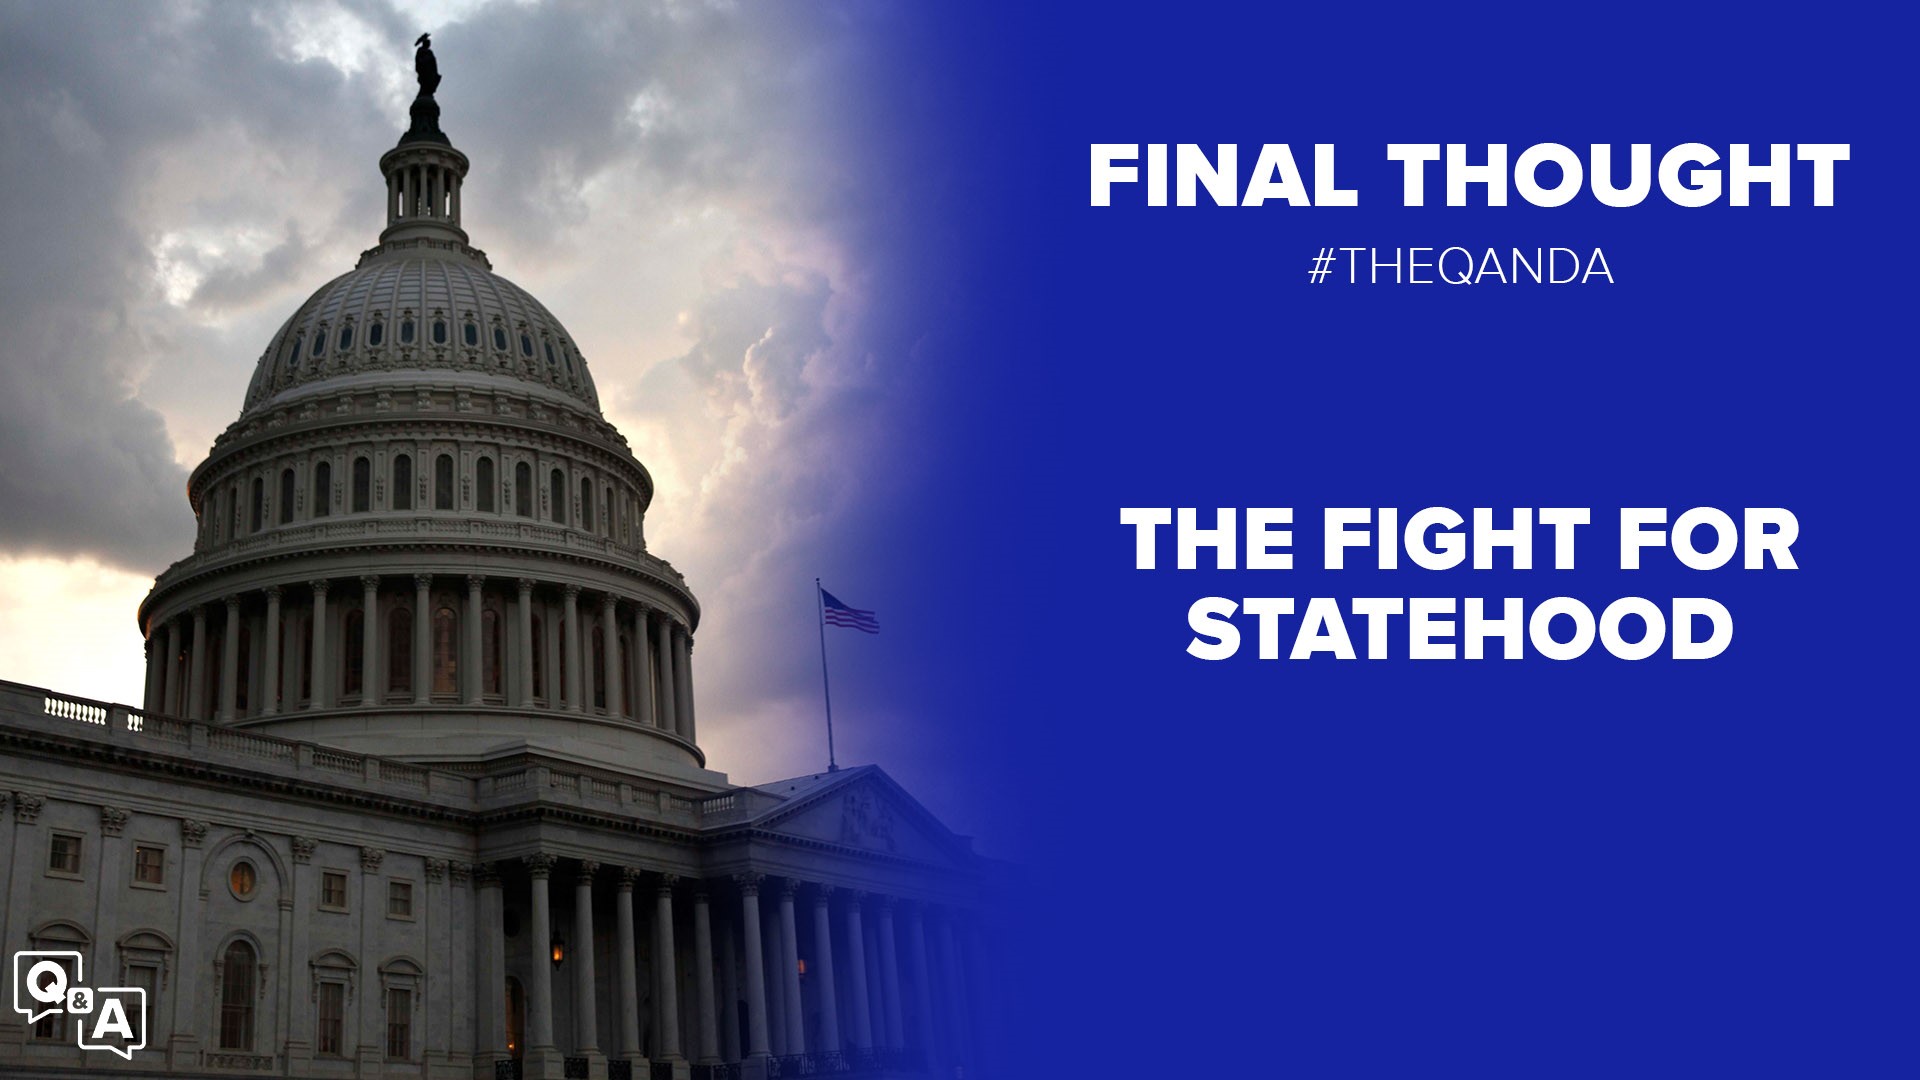 DC's fight for statehood gains new ground and the recent progress we've seen gives renewed hope. Democrats have the votes to get a bill, making DC the 51st State